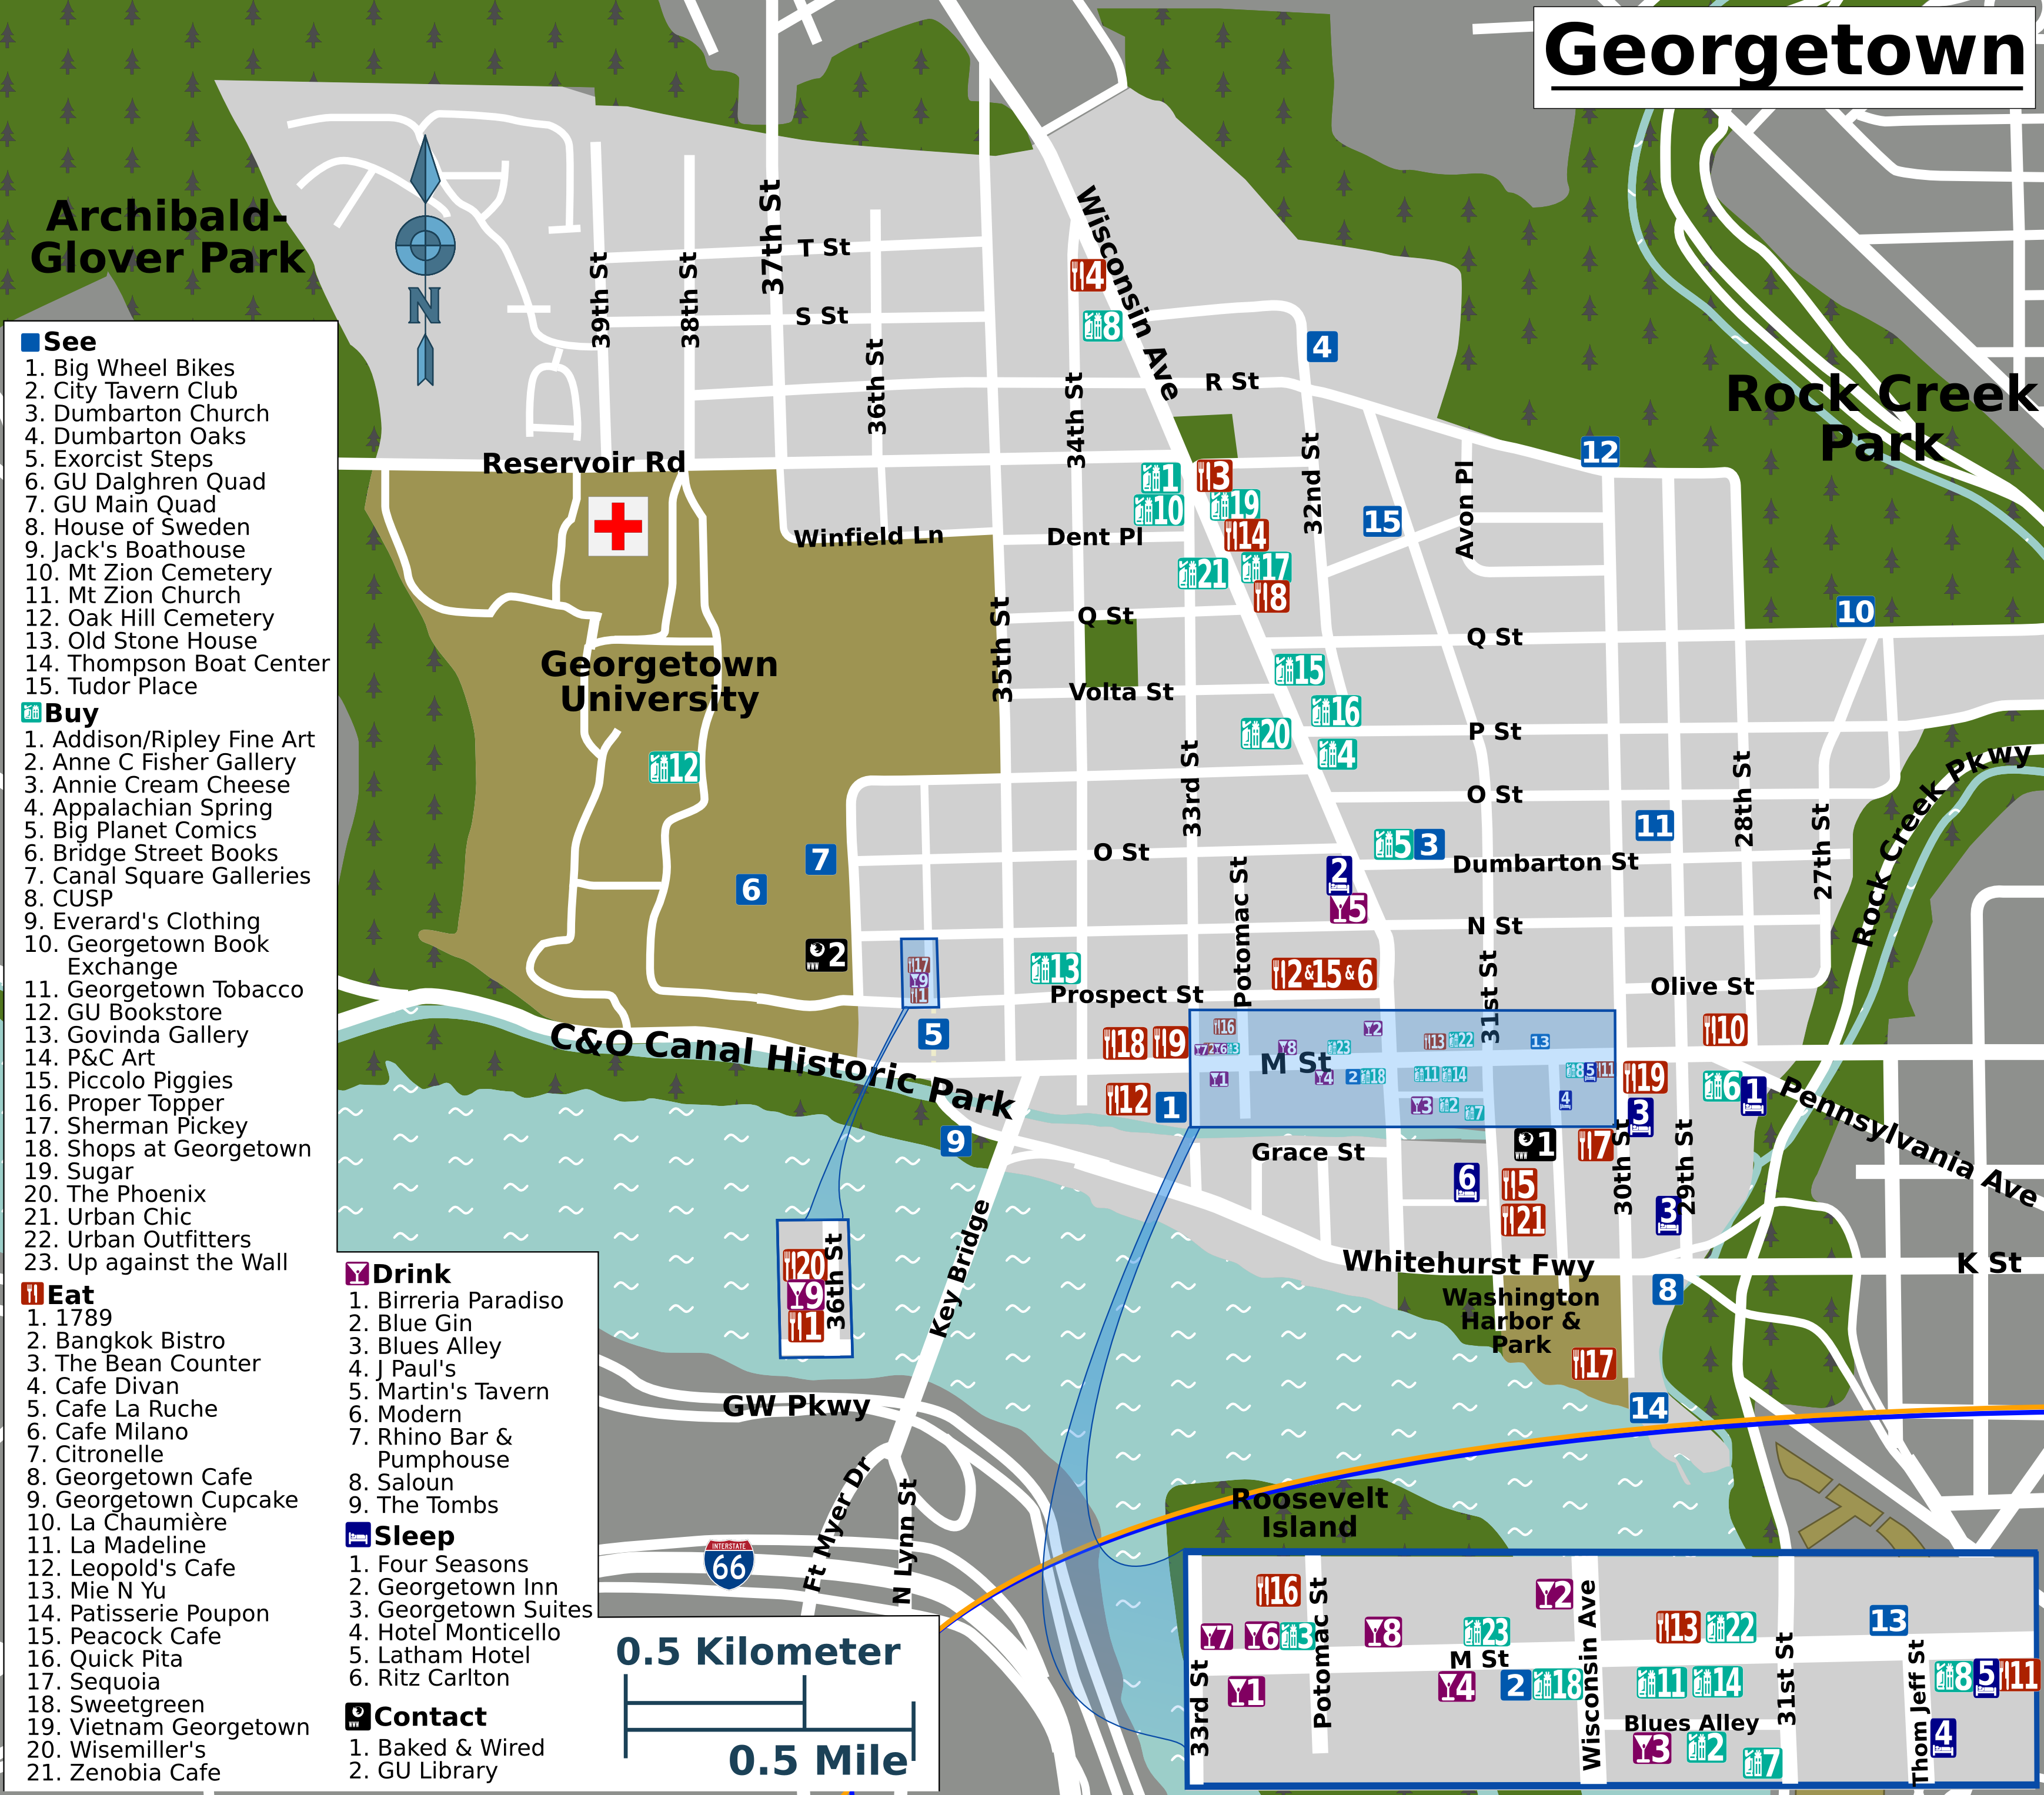 File:Georgetown map.png - Wikimedia Commons